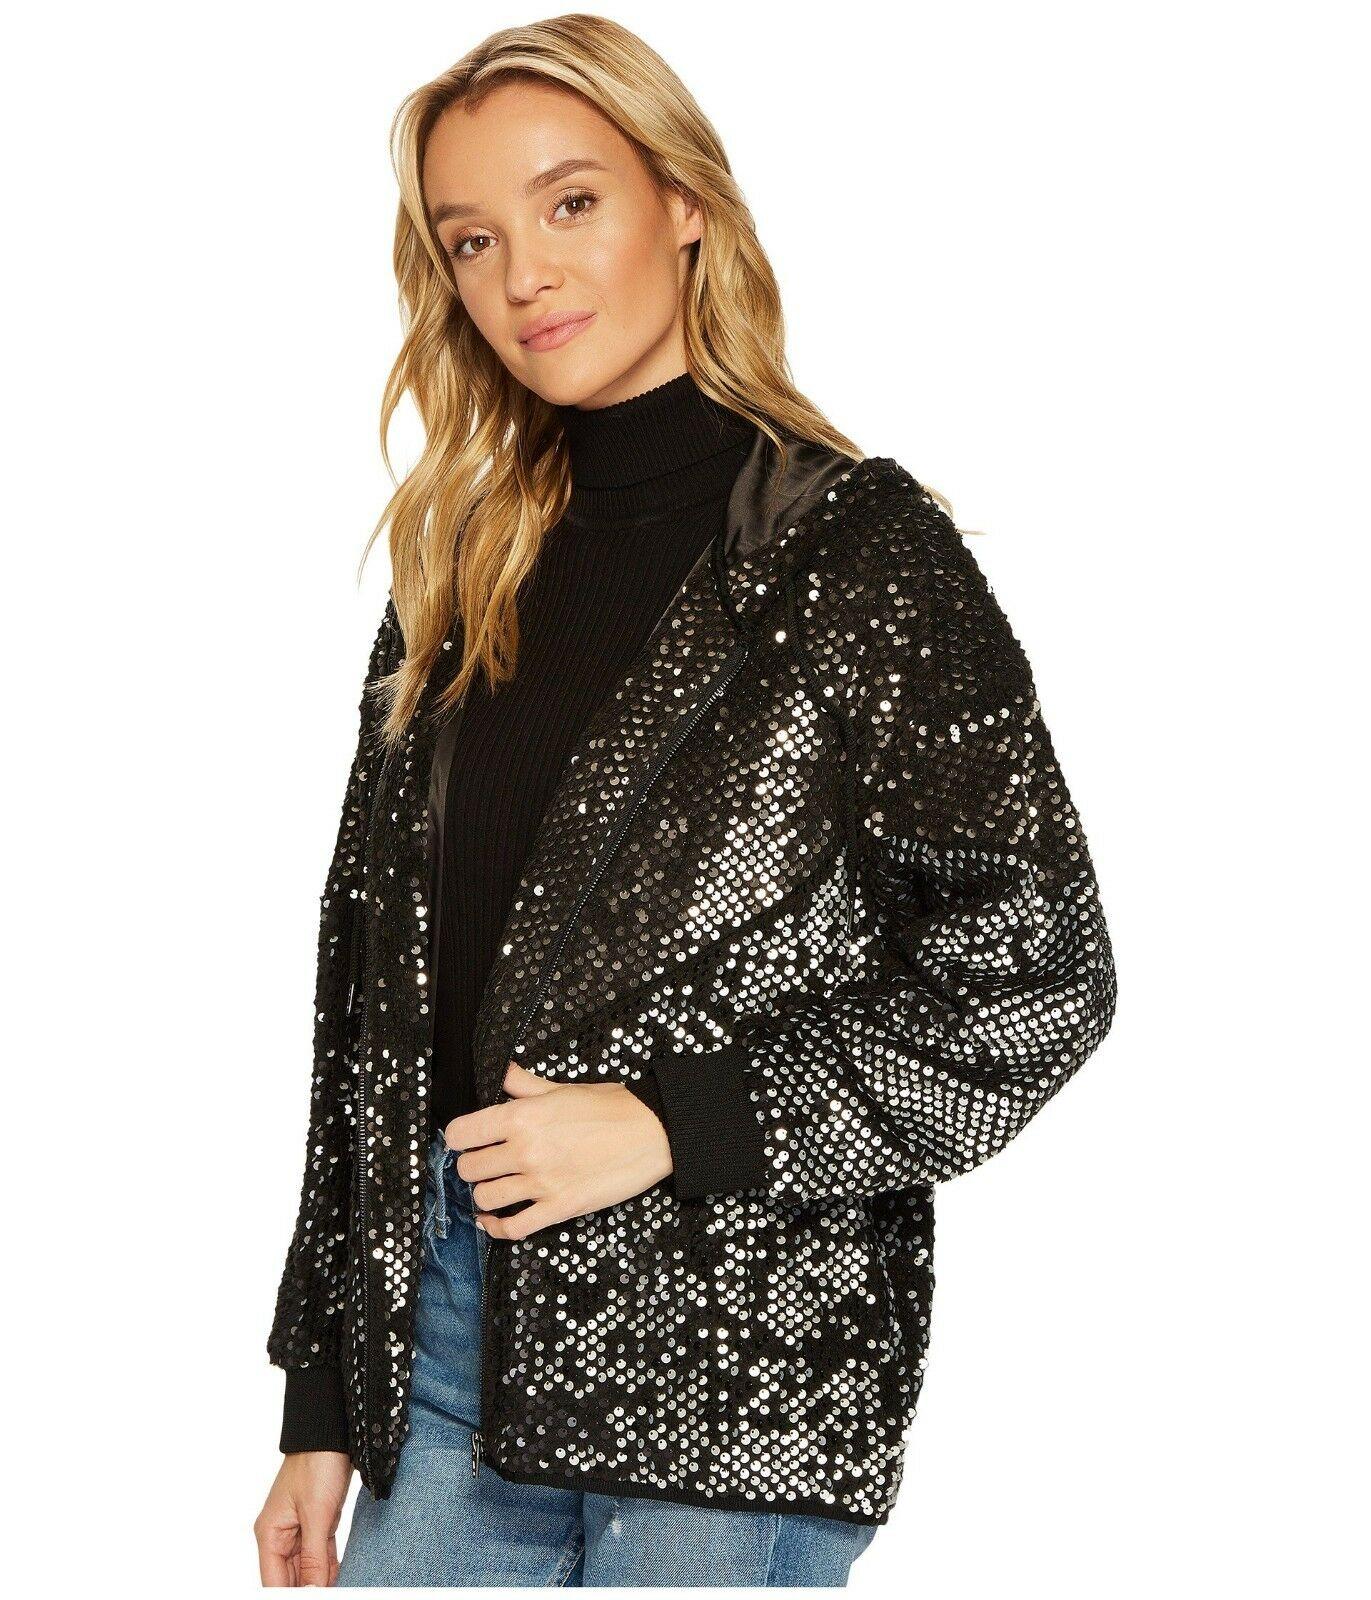 BLANKNYC Womens Silver Studded Sequined Bomber Jacket in Black Light Size L - SVNYFancy